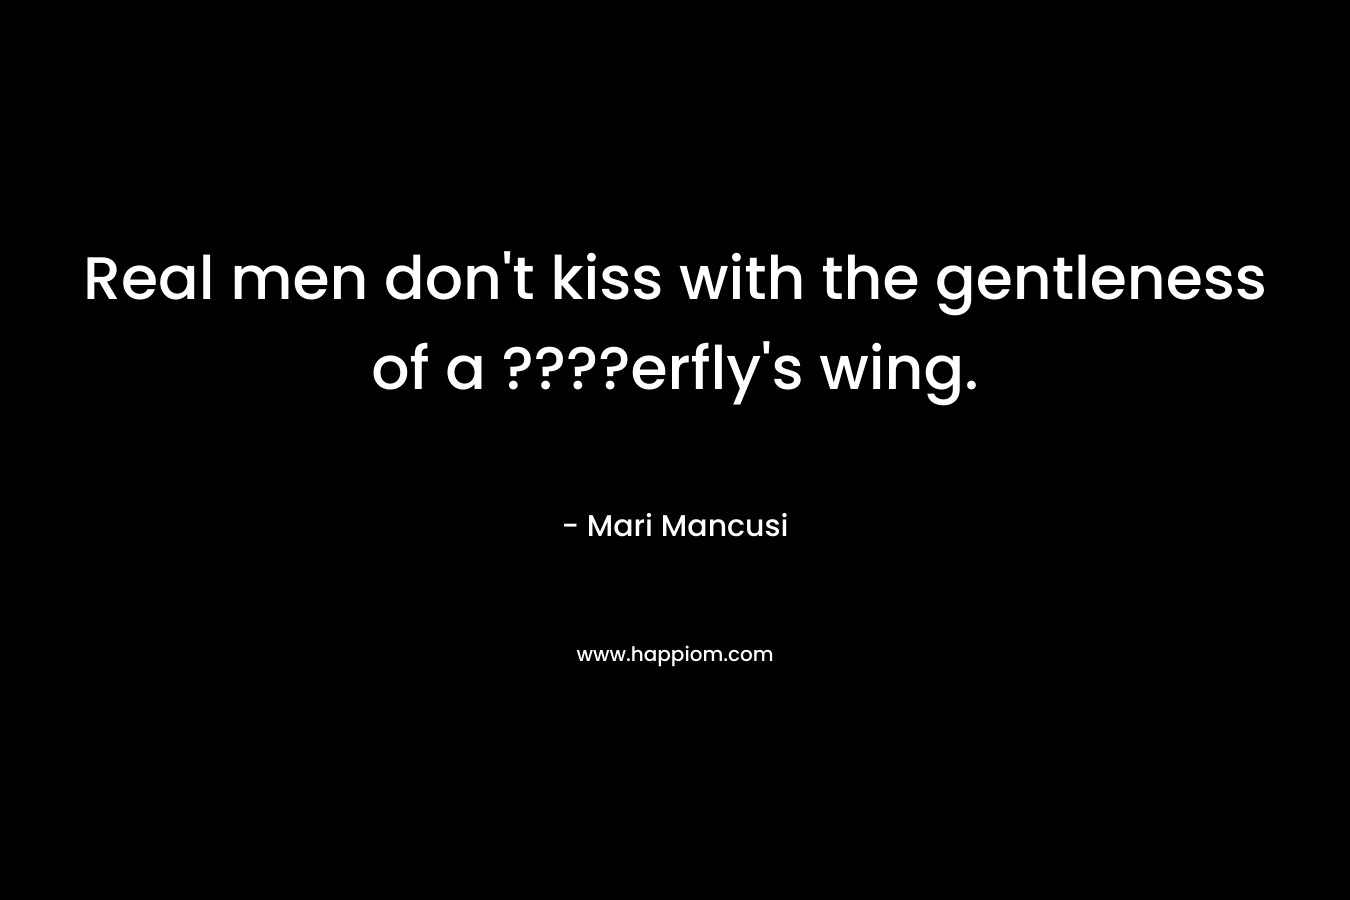 Real men don’t kiss with the gentleness of a ????erfly’s wing. – Mari Mancusi